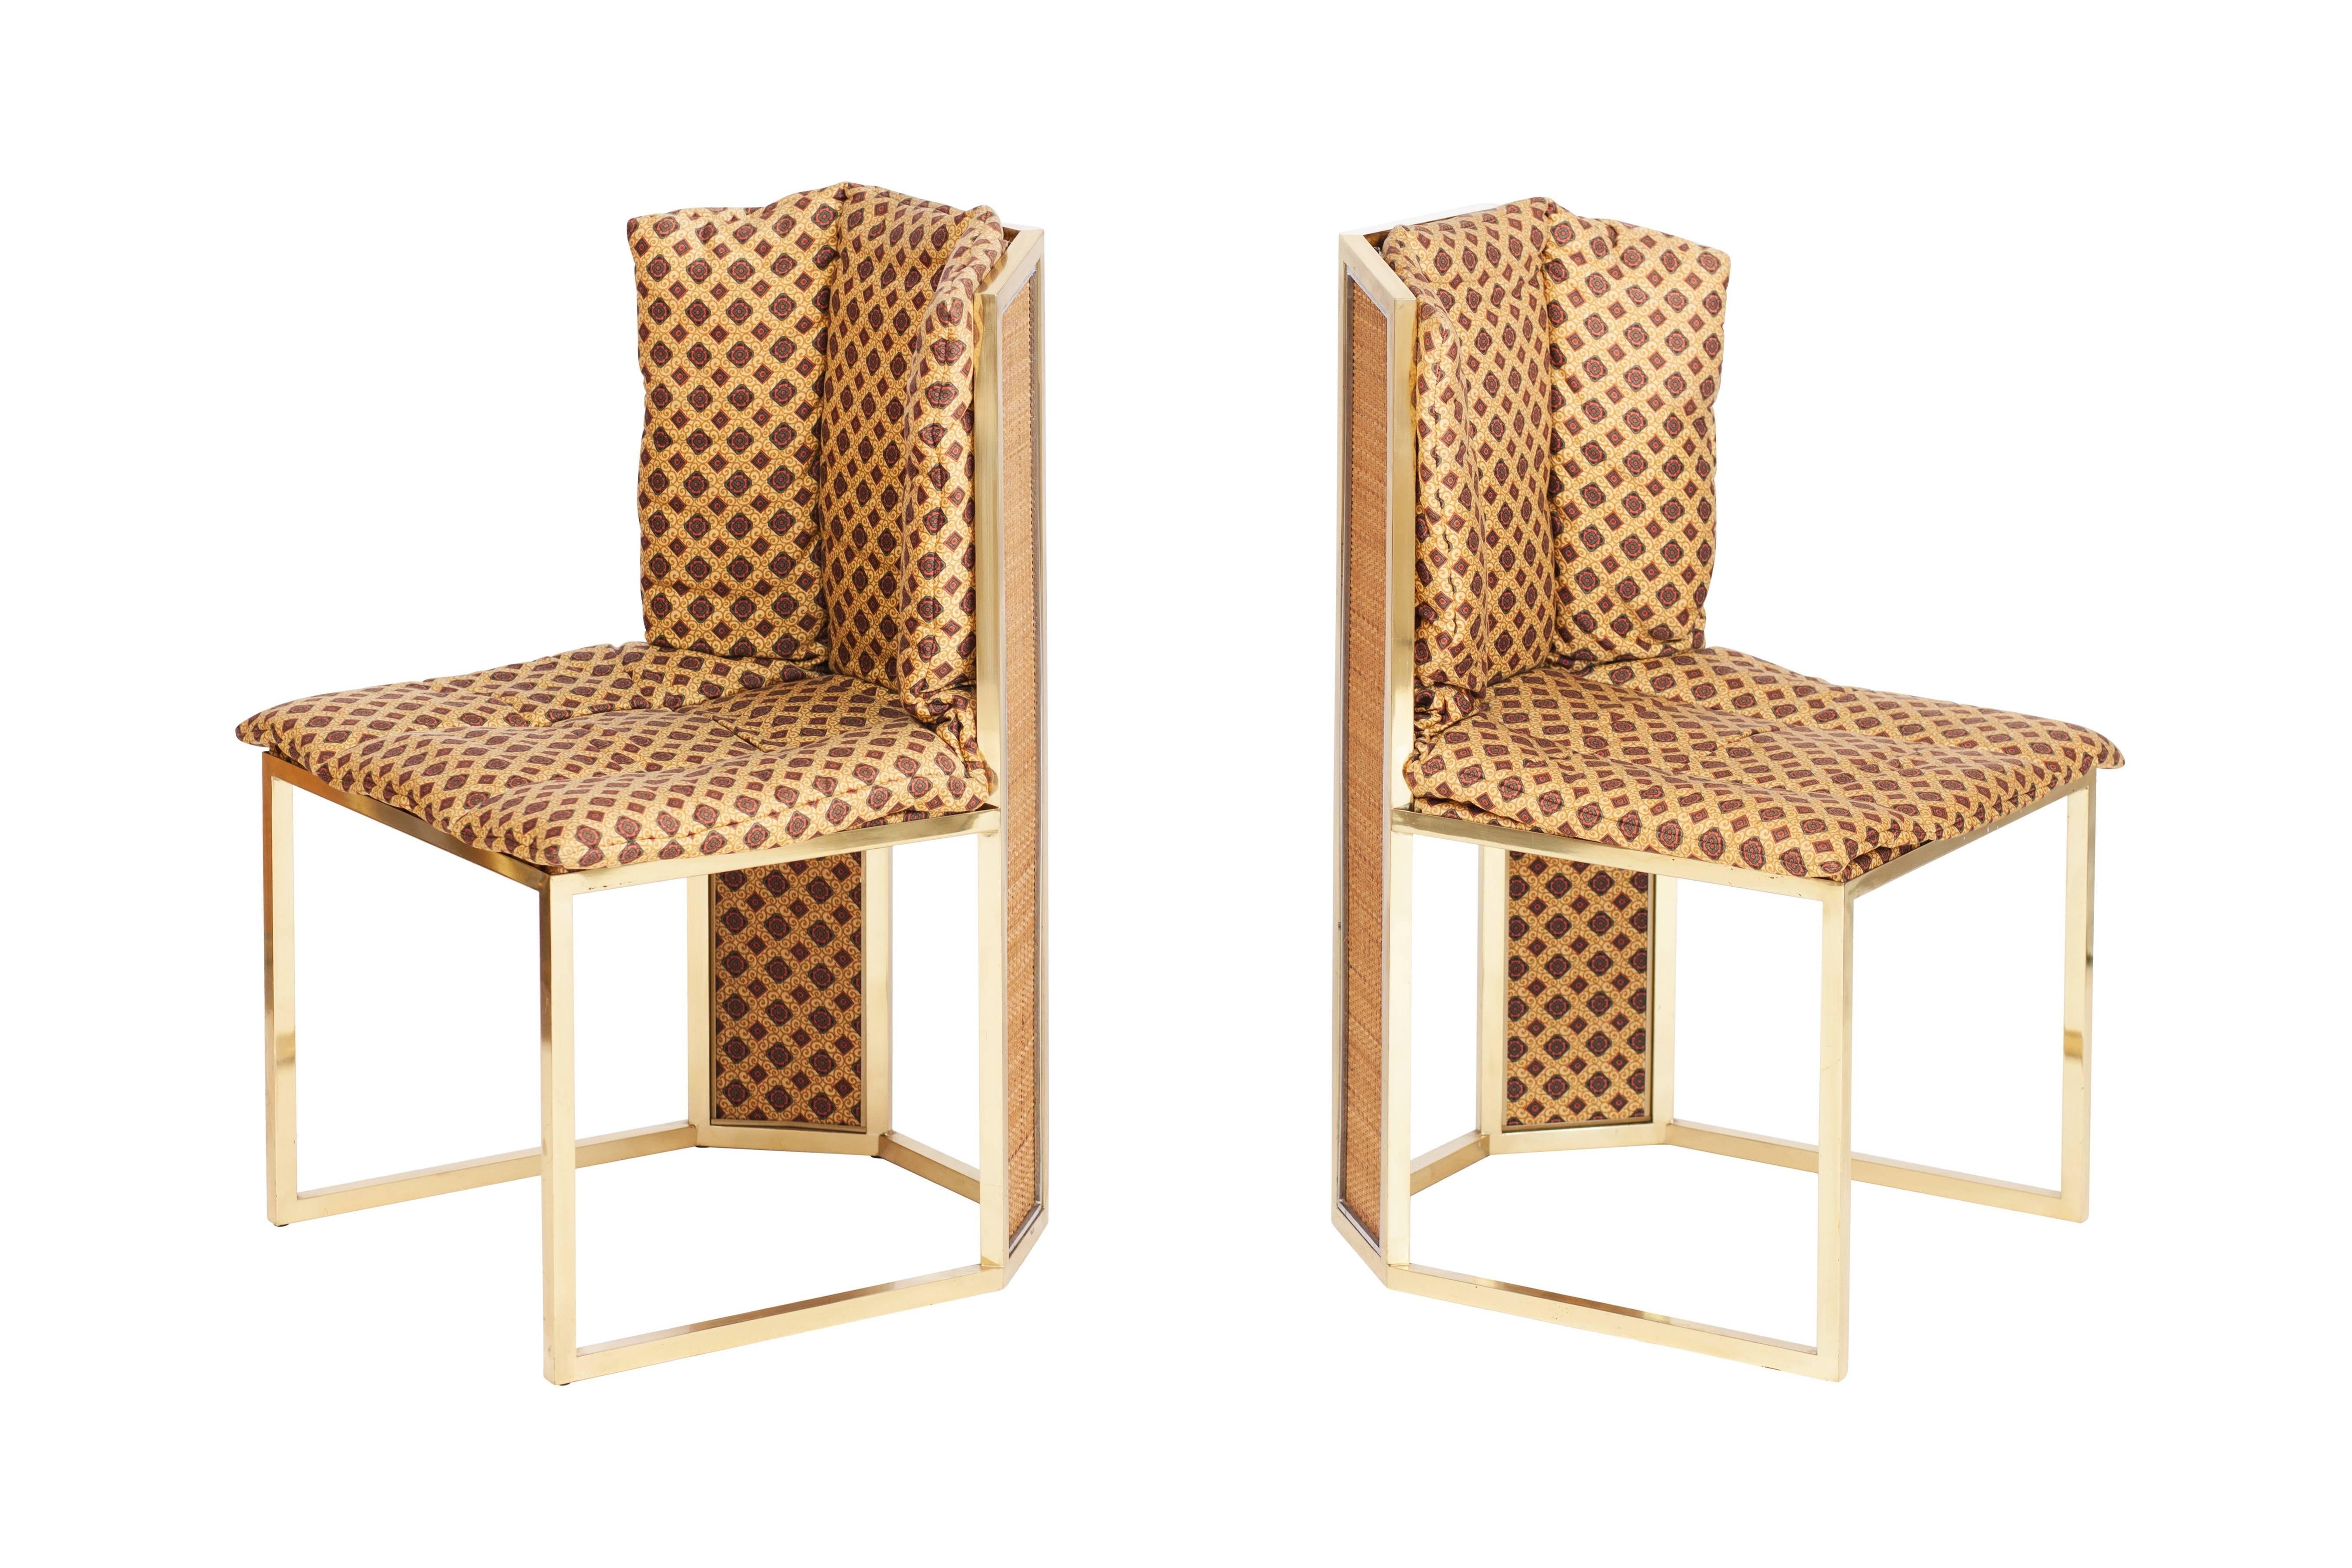 Wicker Hollywood Regency Gabriella Crespi Style Brass and Rattan Dining Chairs